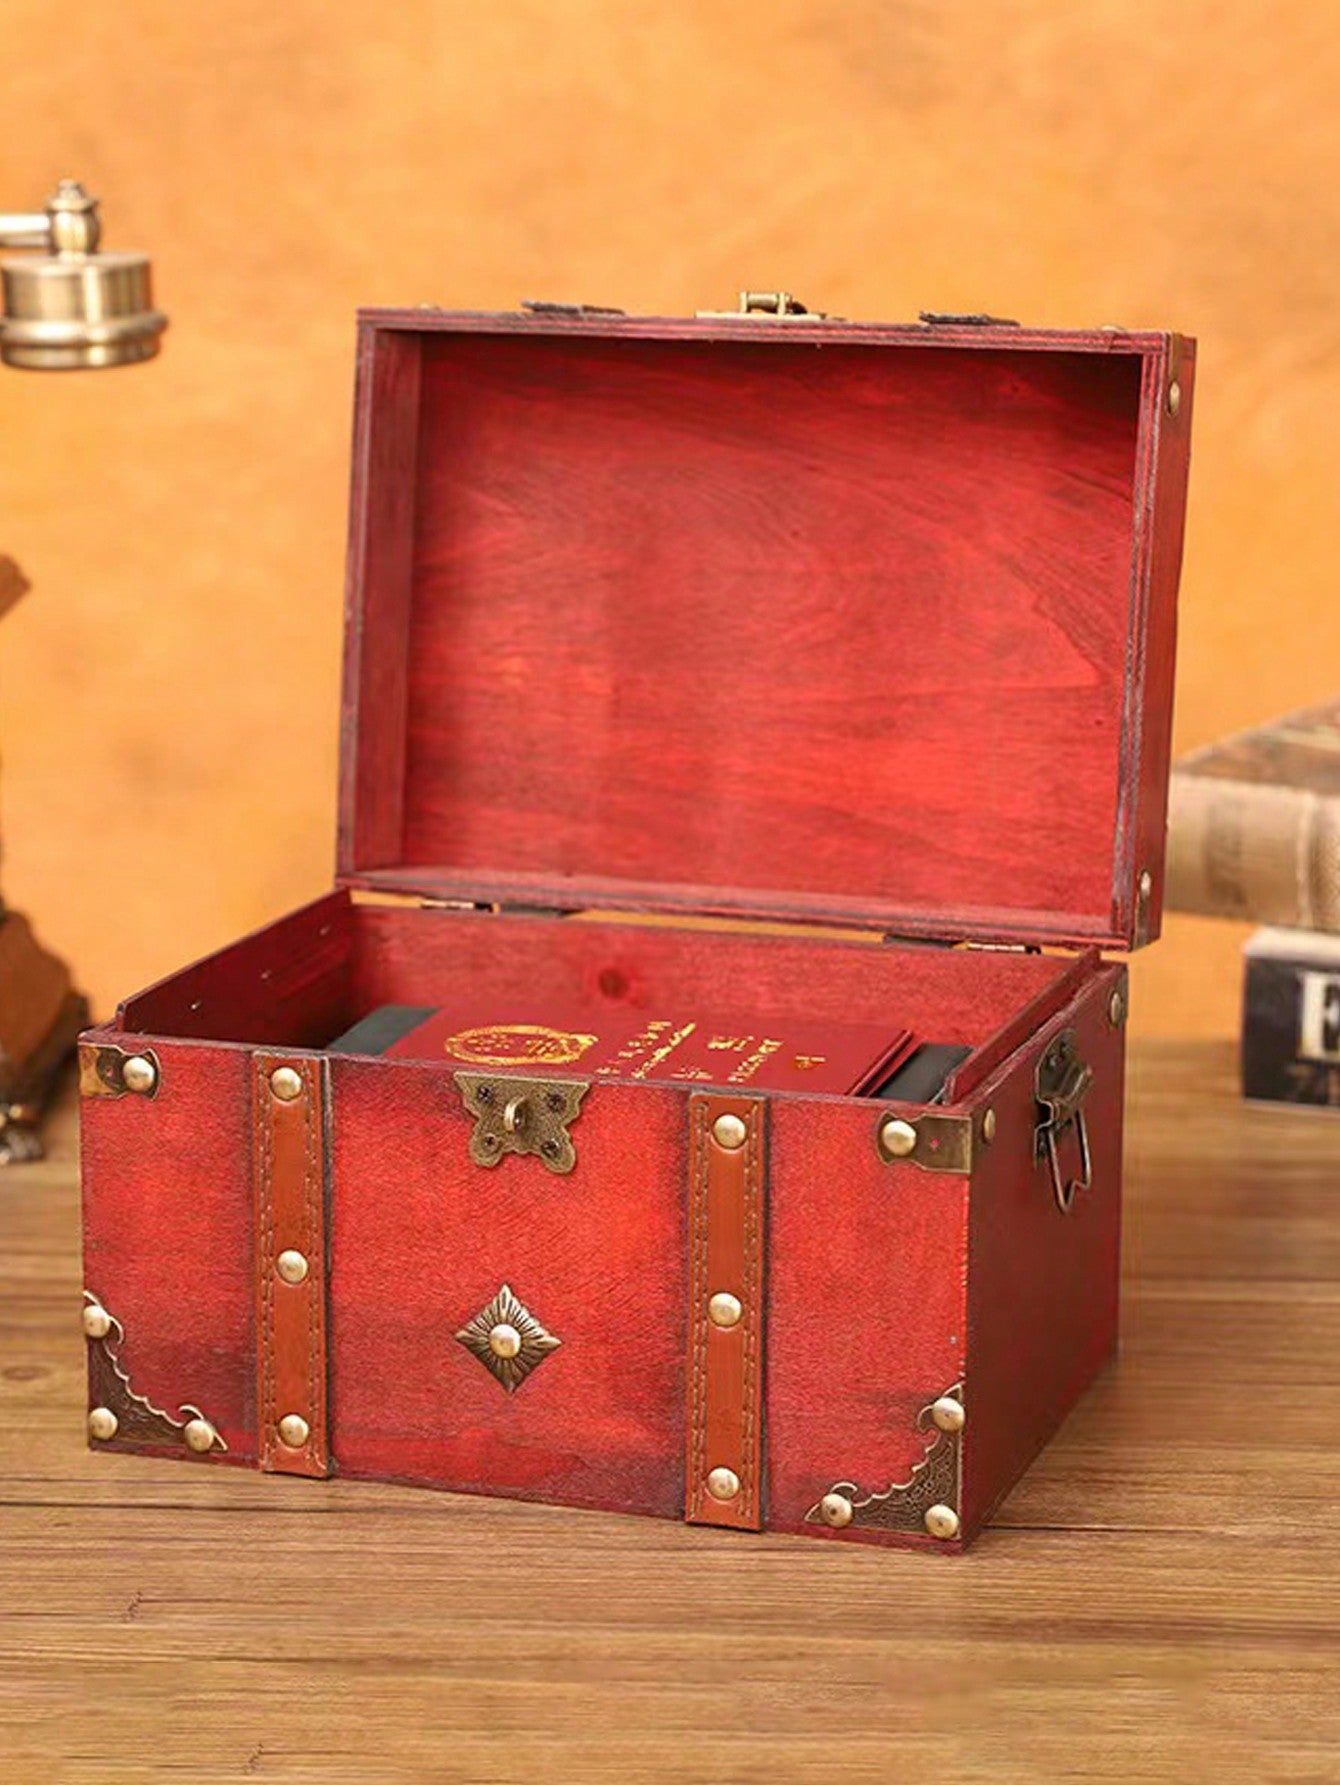 1pc Large Red Vintage-style Wooden Square Jewelry Box With Lock & Password For Crafts, Storage, And Prop Use